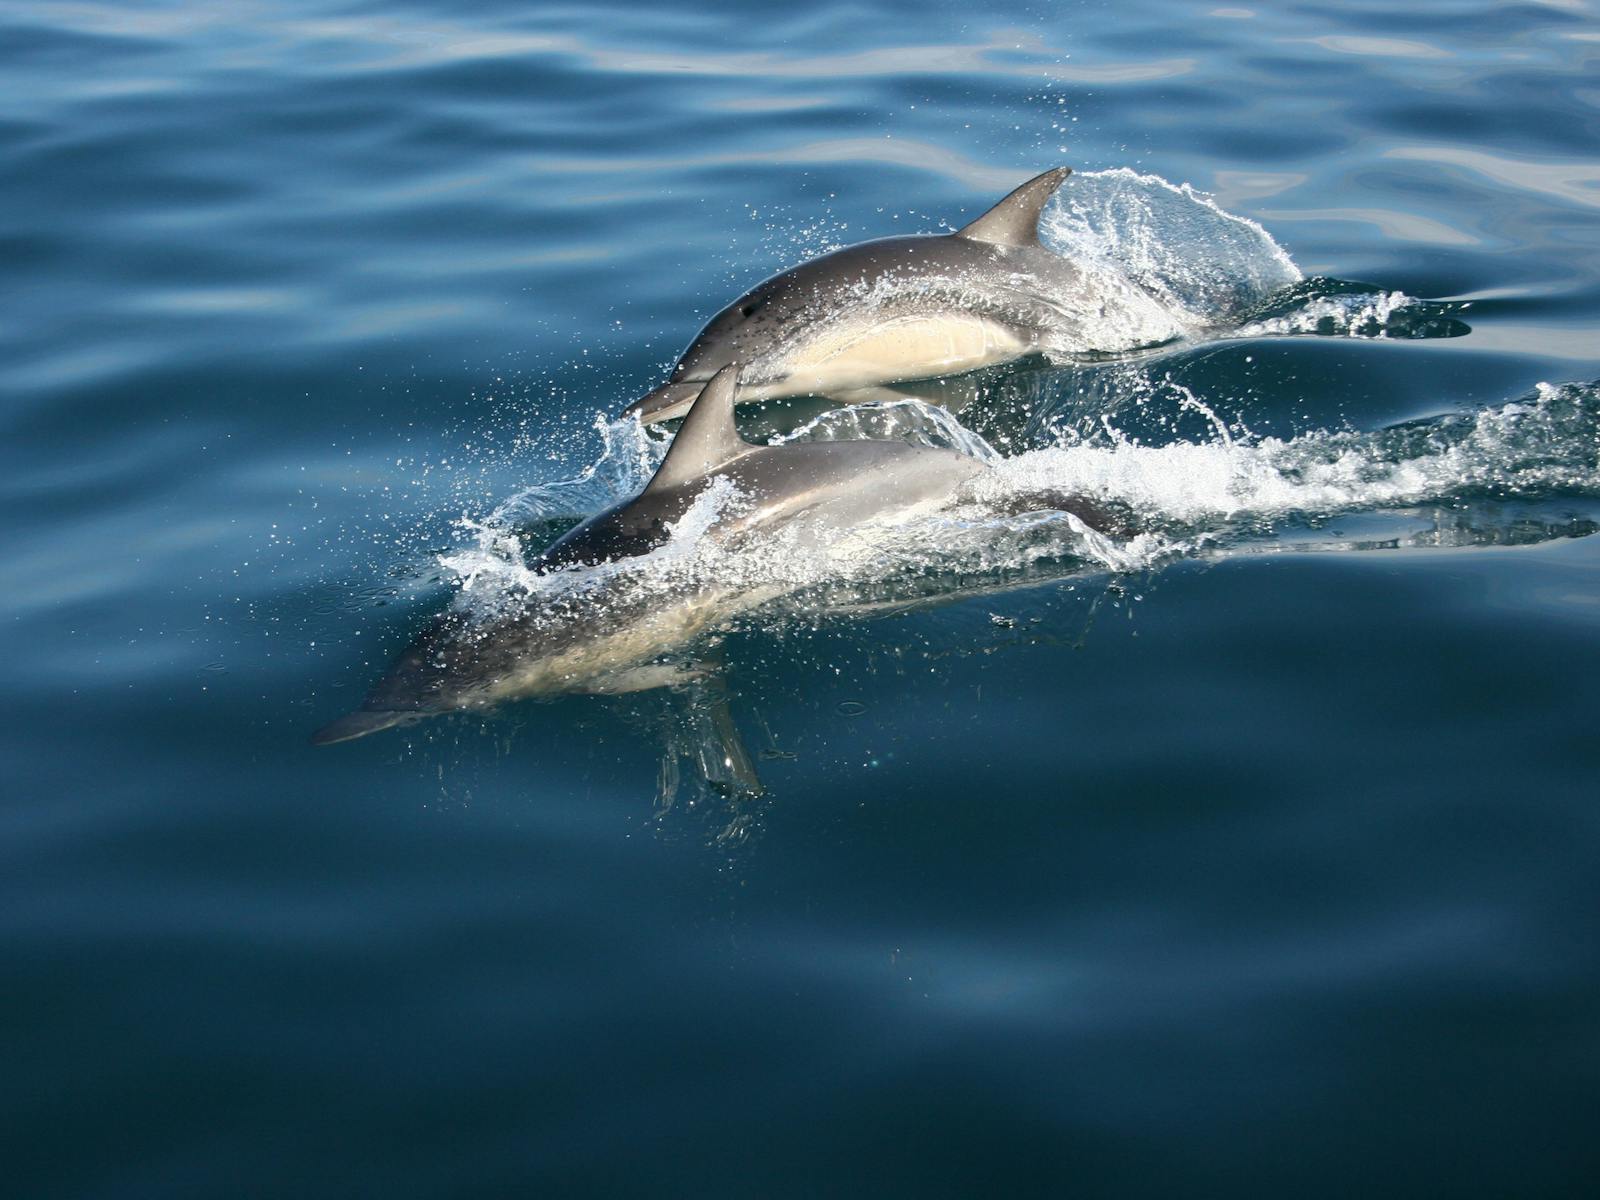 Dolphins are some of the friendly locals we see